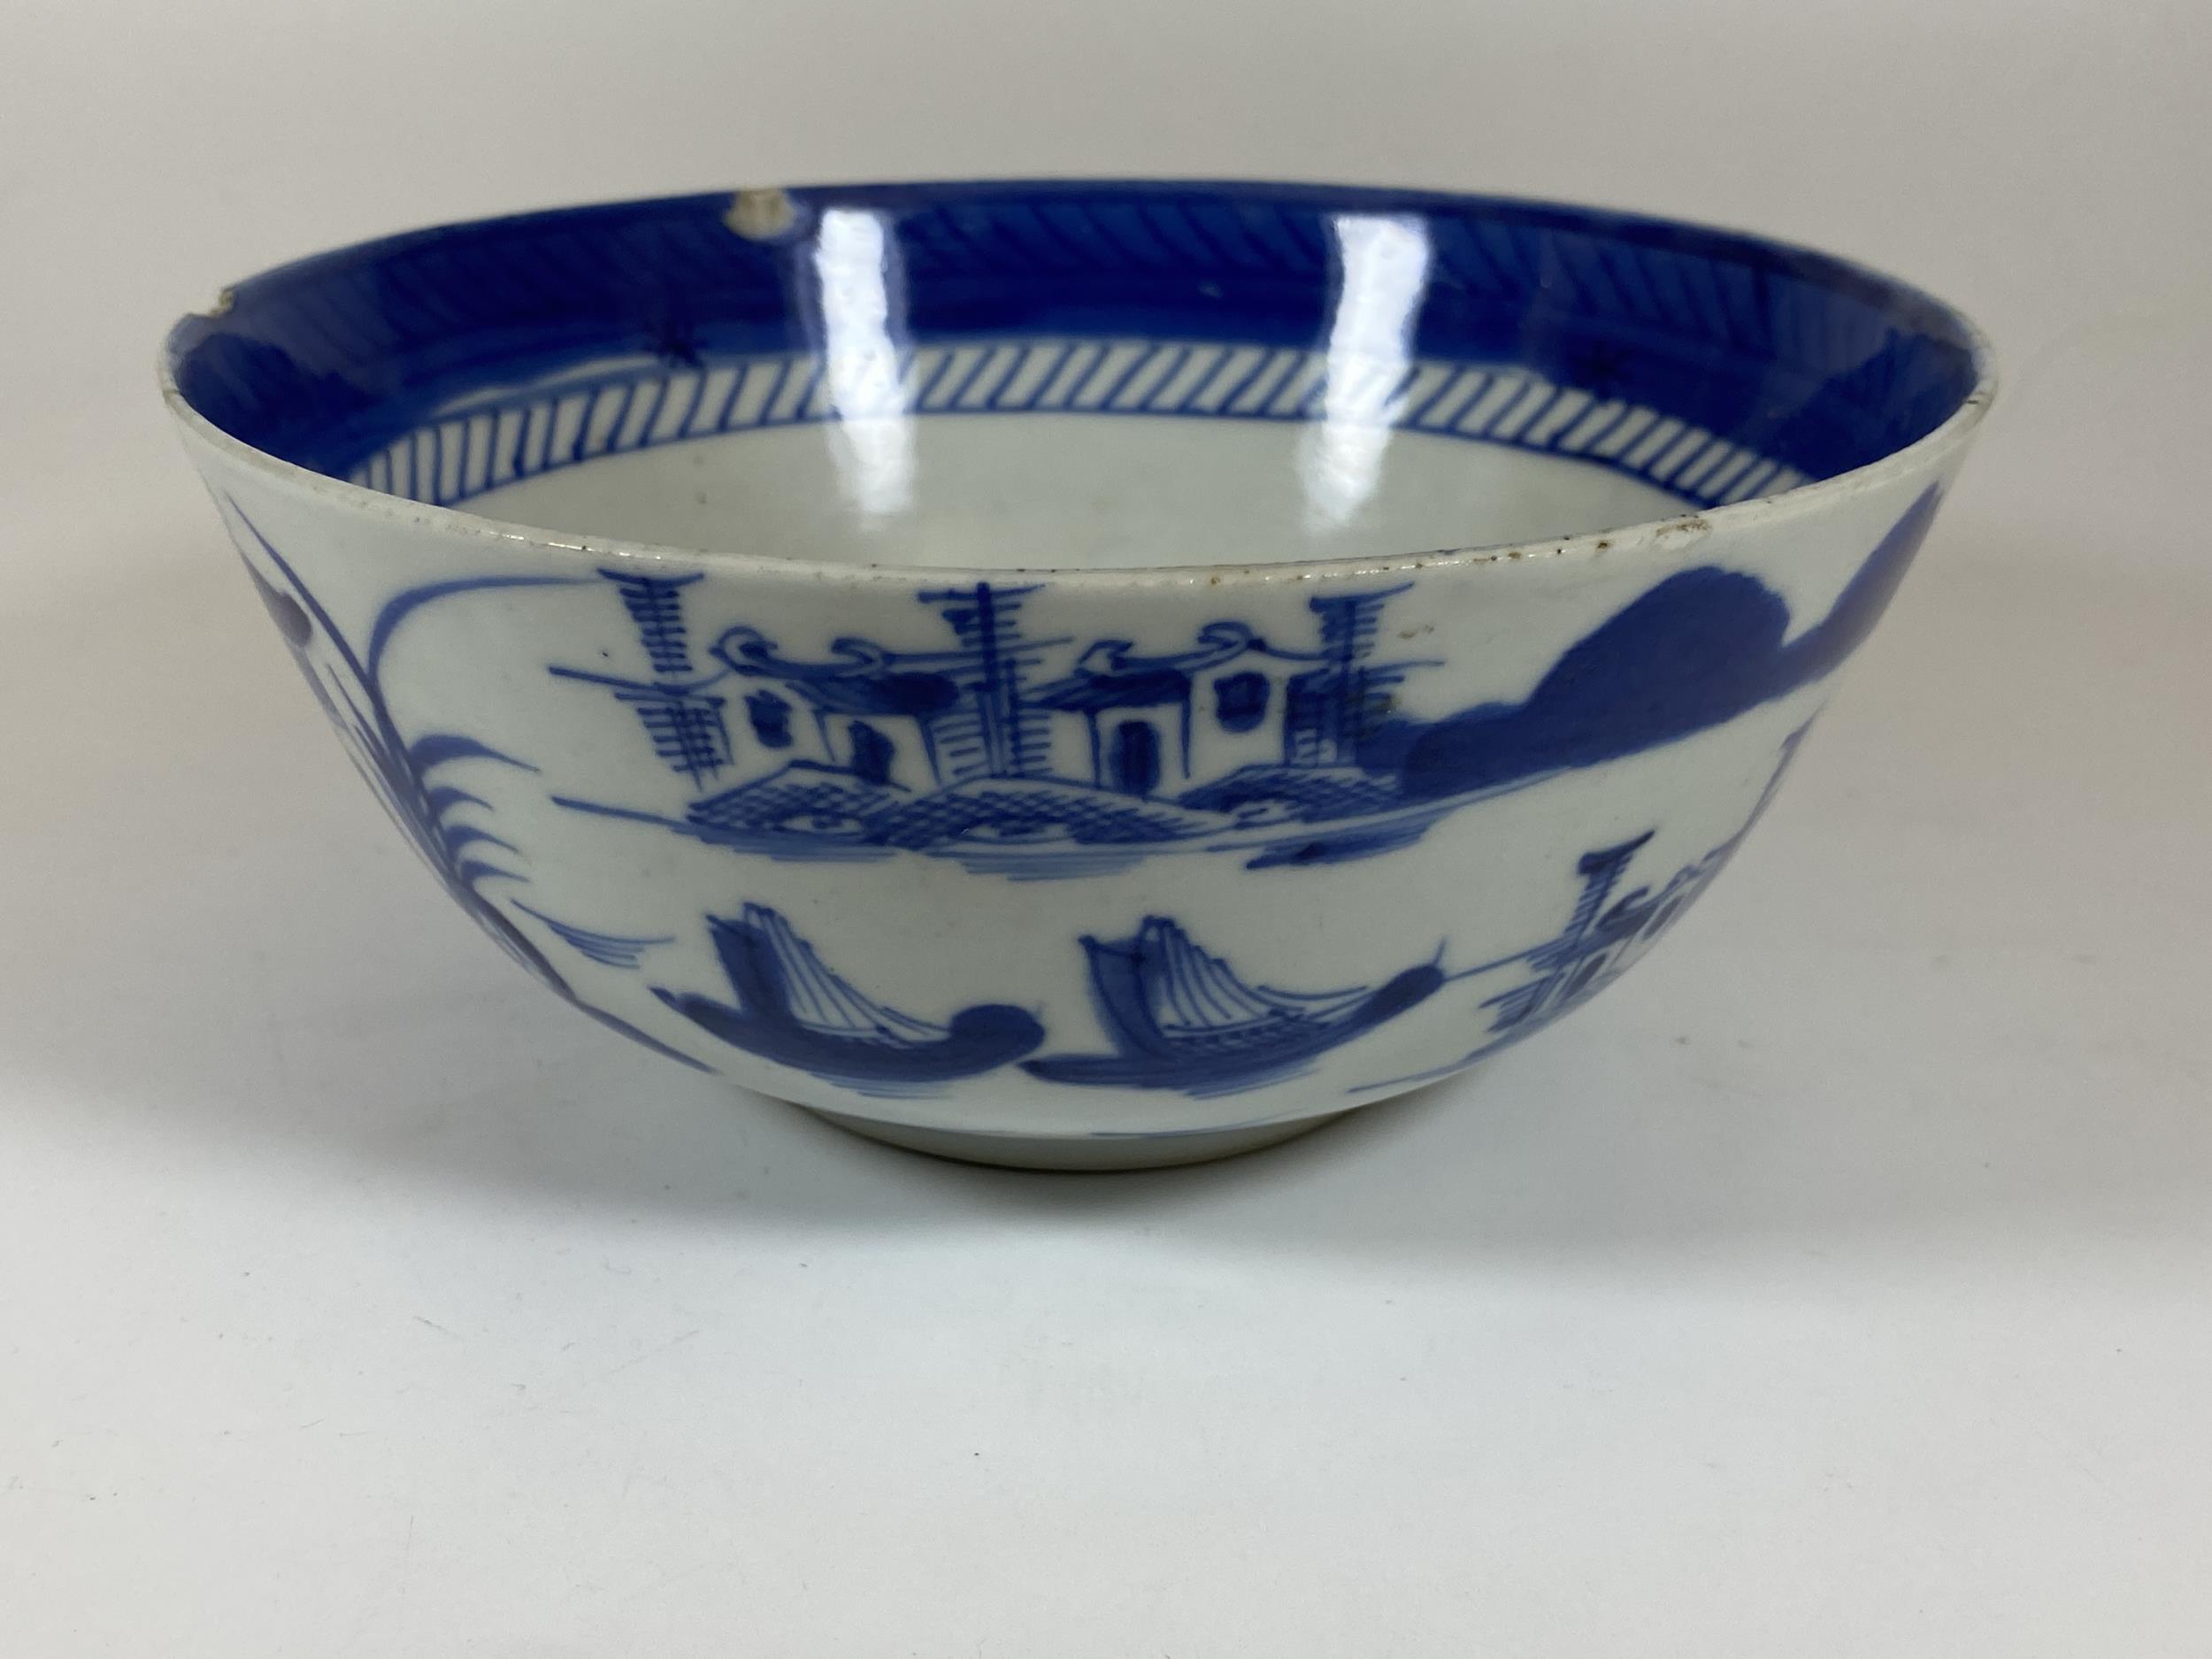 A 19TH CENTURY CHINESE BLUE AND WHITE PORCELAIN BOWL WITH PAGODA DESIGN, DIAMETER 17CM - Image 3 of 6